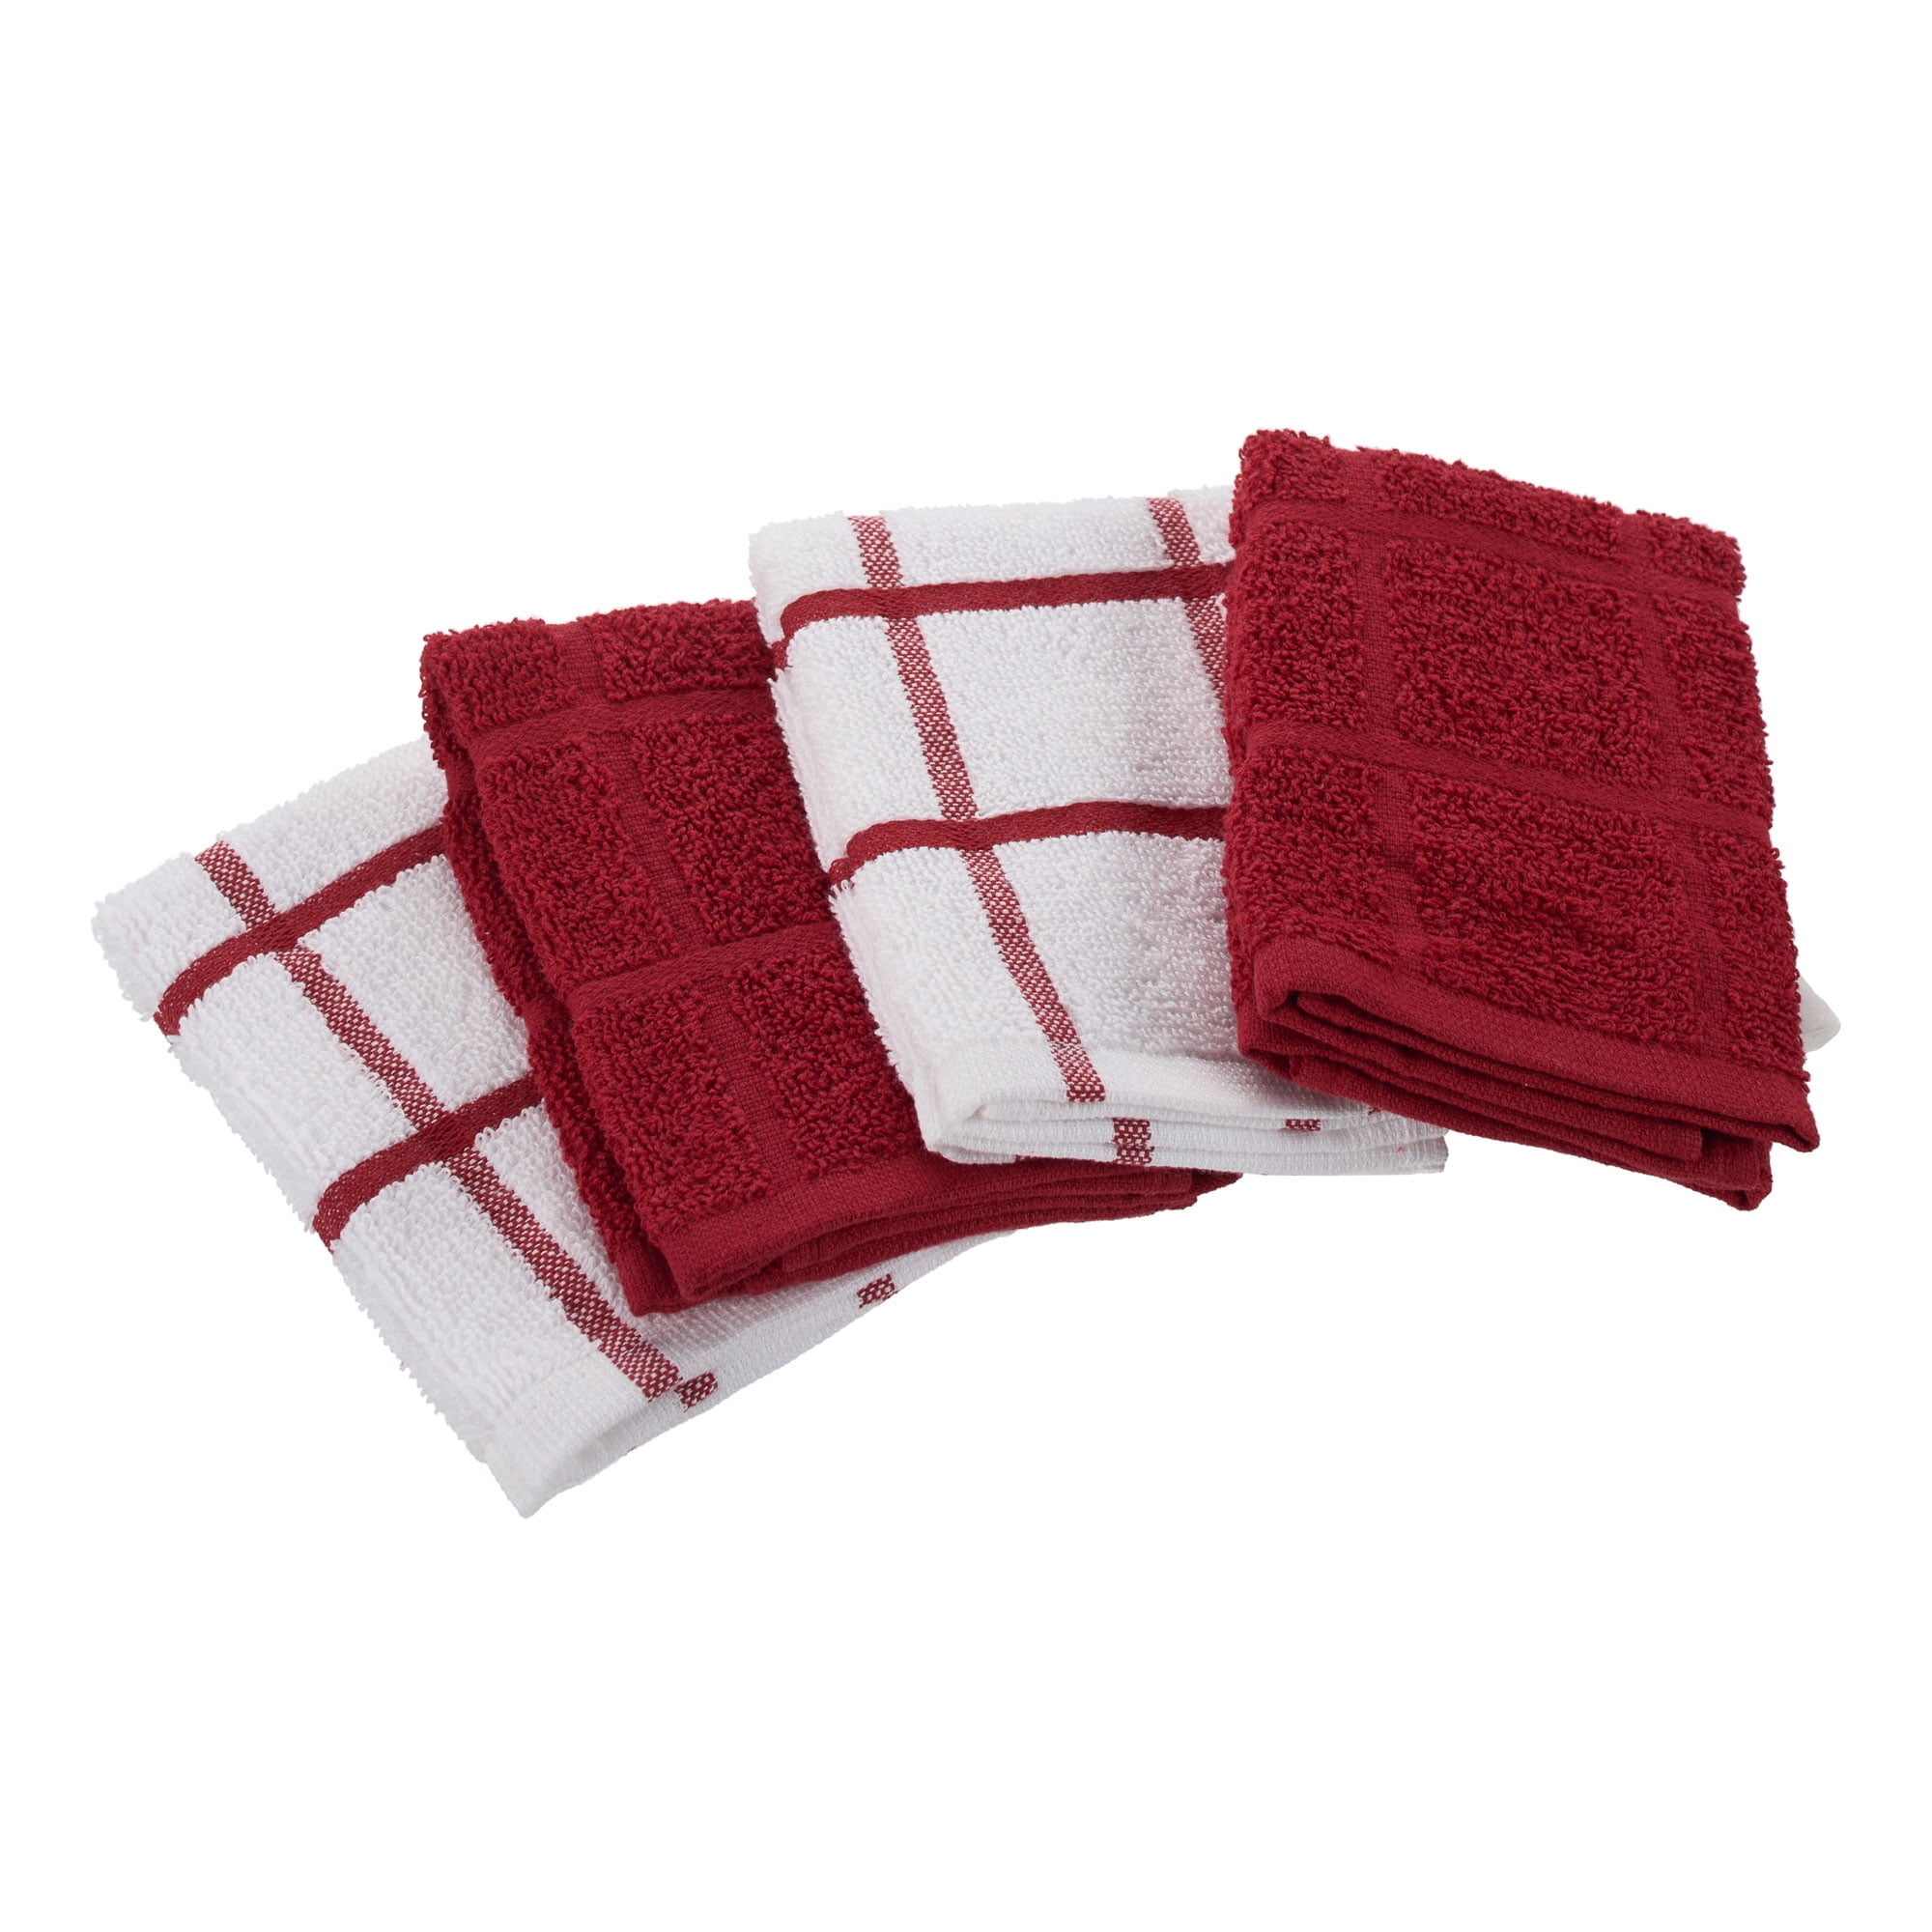 Hand Woven Hache Dish Towel with Dish Cloth | Black & White Stripes with  Red Border